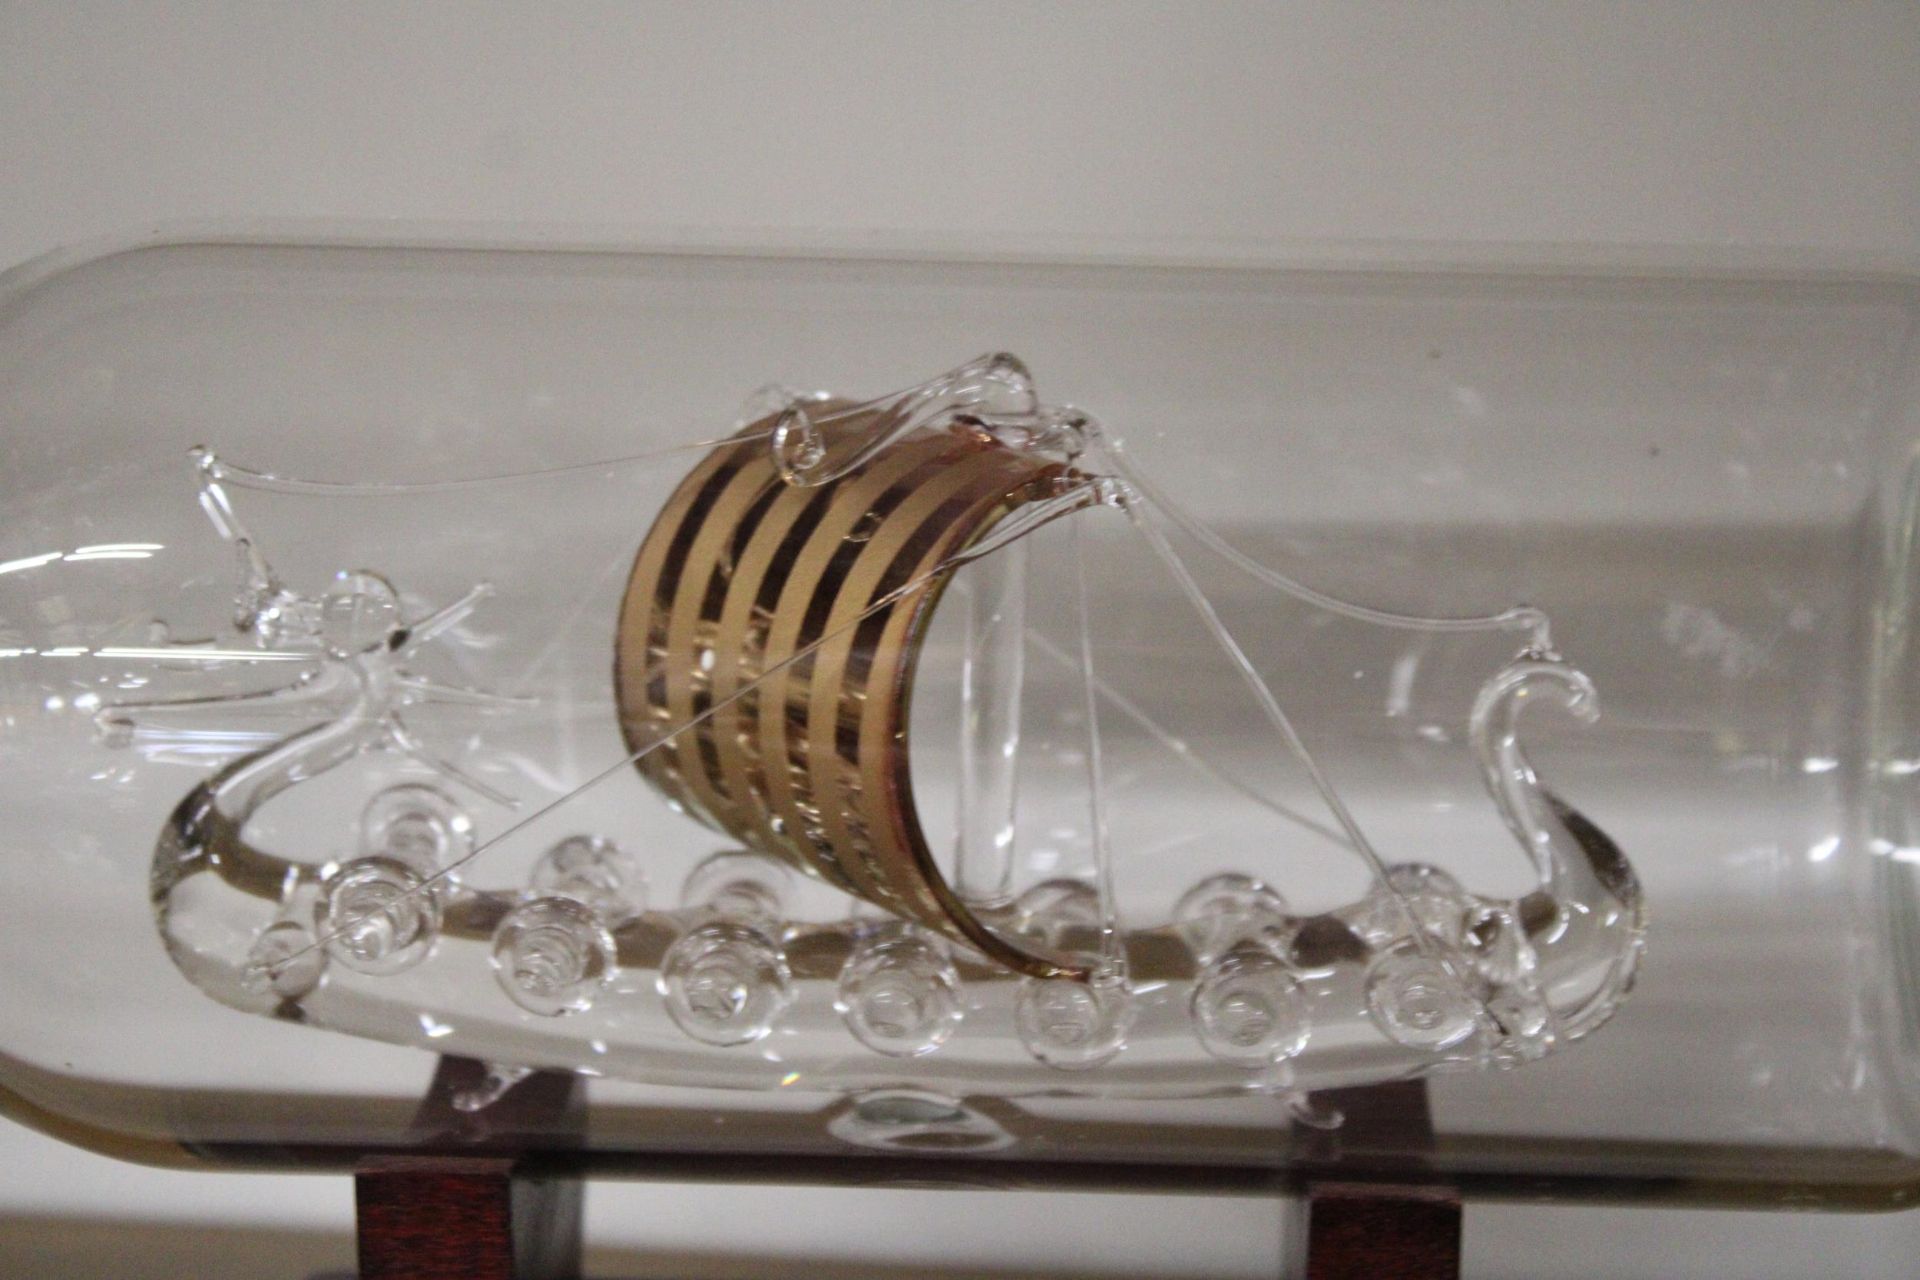 A GLASS MODEL OF A VIKING LONGSHIP IN A BOTTLE - Image 2 of 5